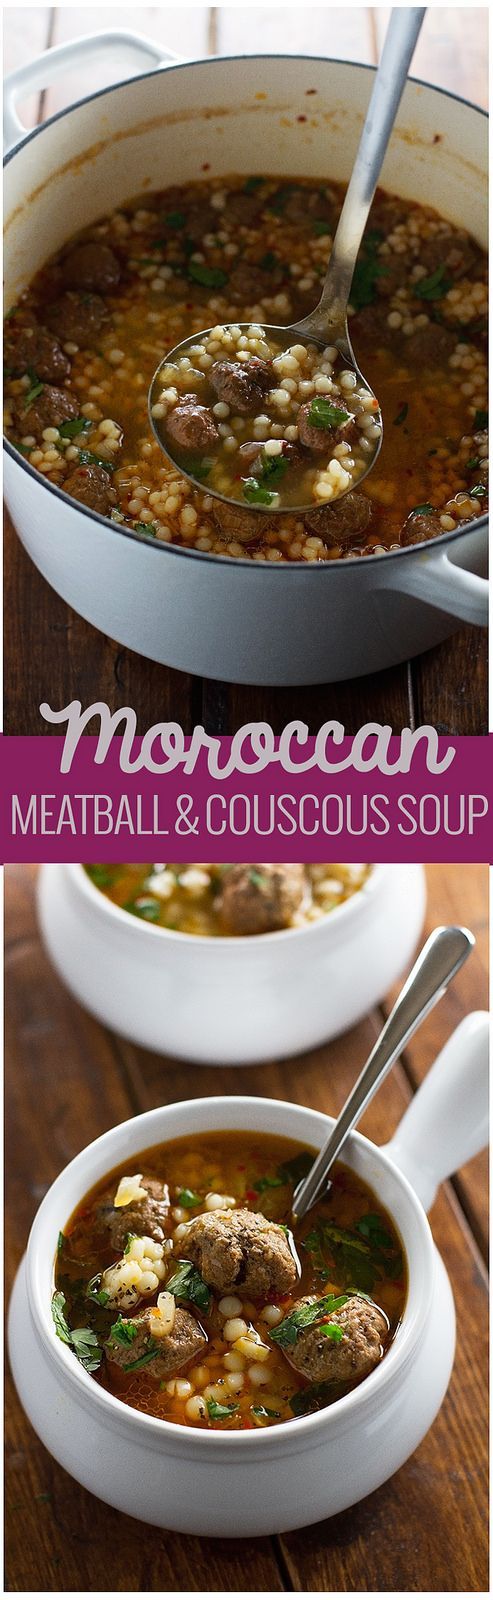 Moroccan Meatball and Couscous Soup – Loaded with tiny meatballs and pearl couscous, this soup is so flavorful!